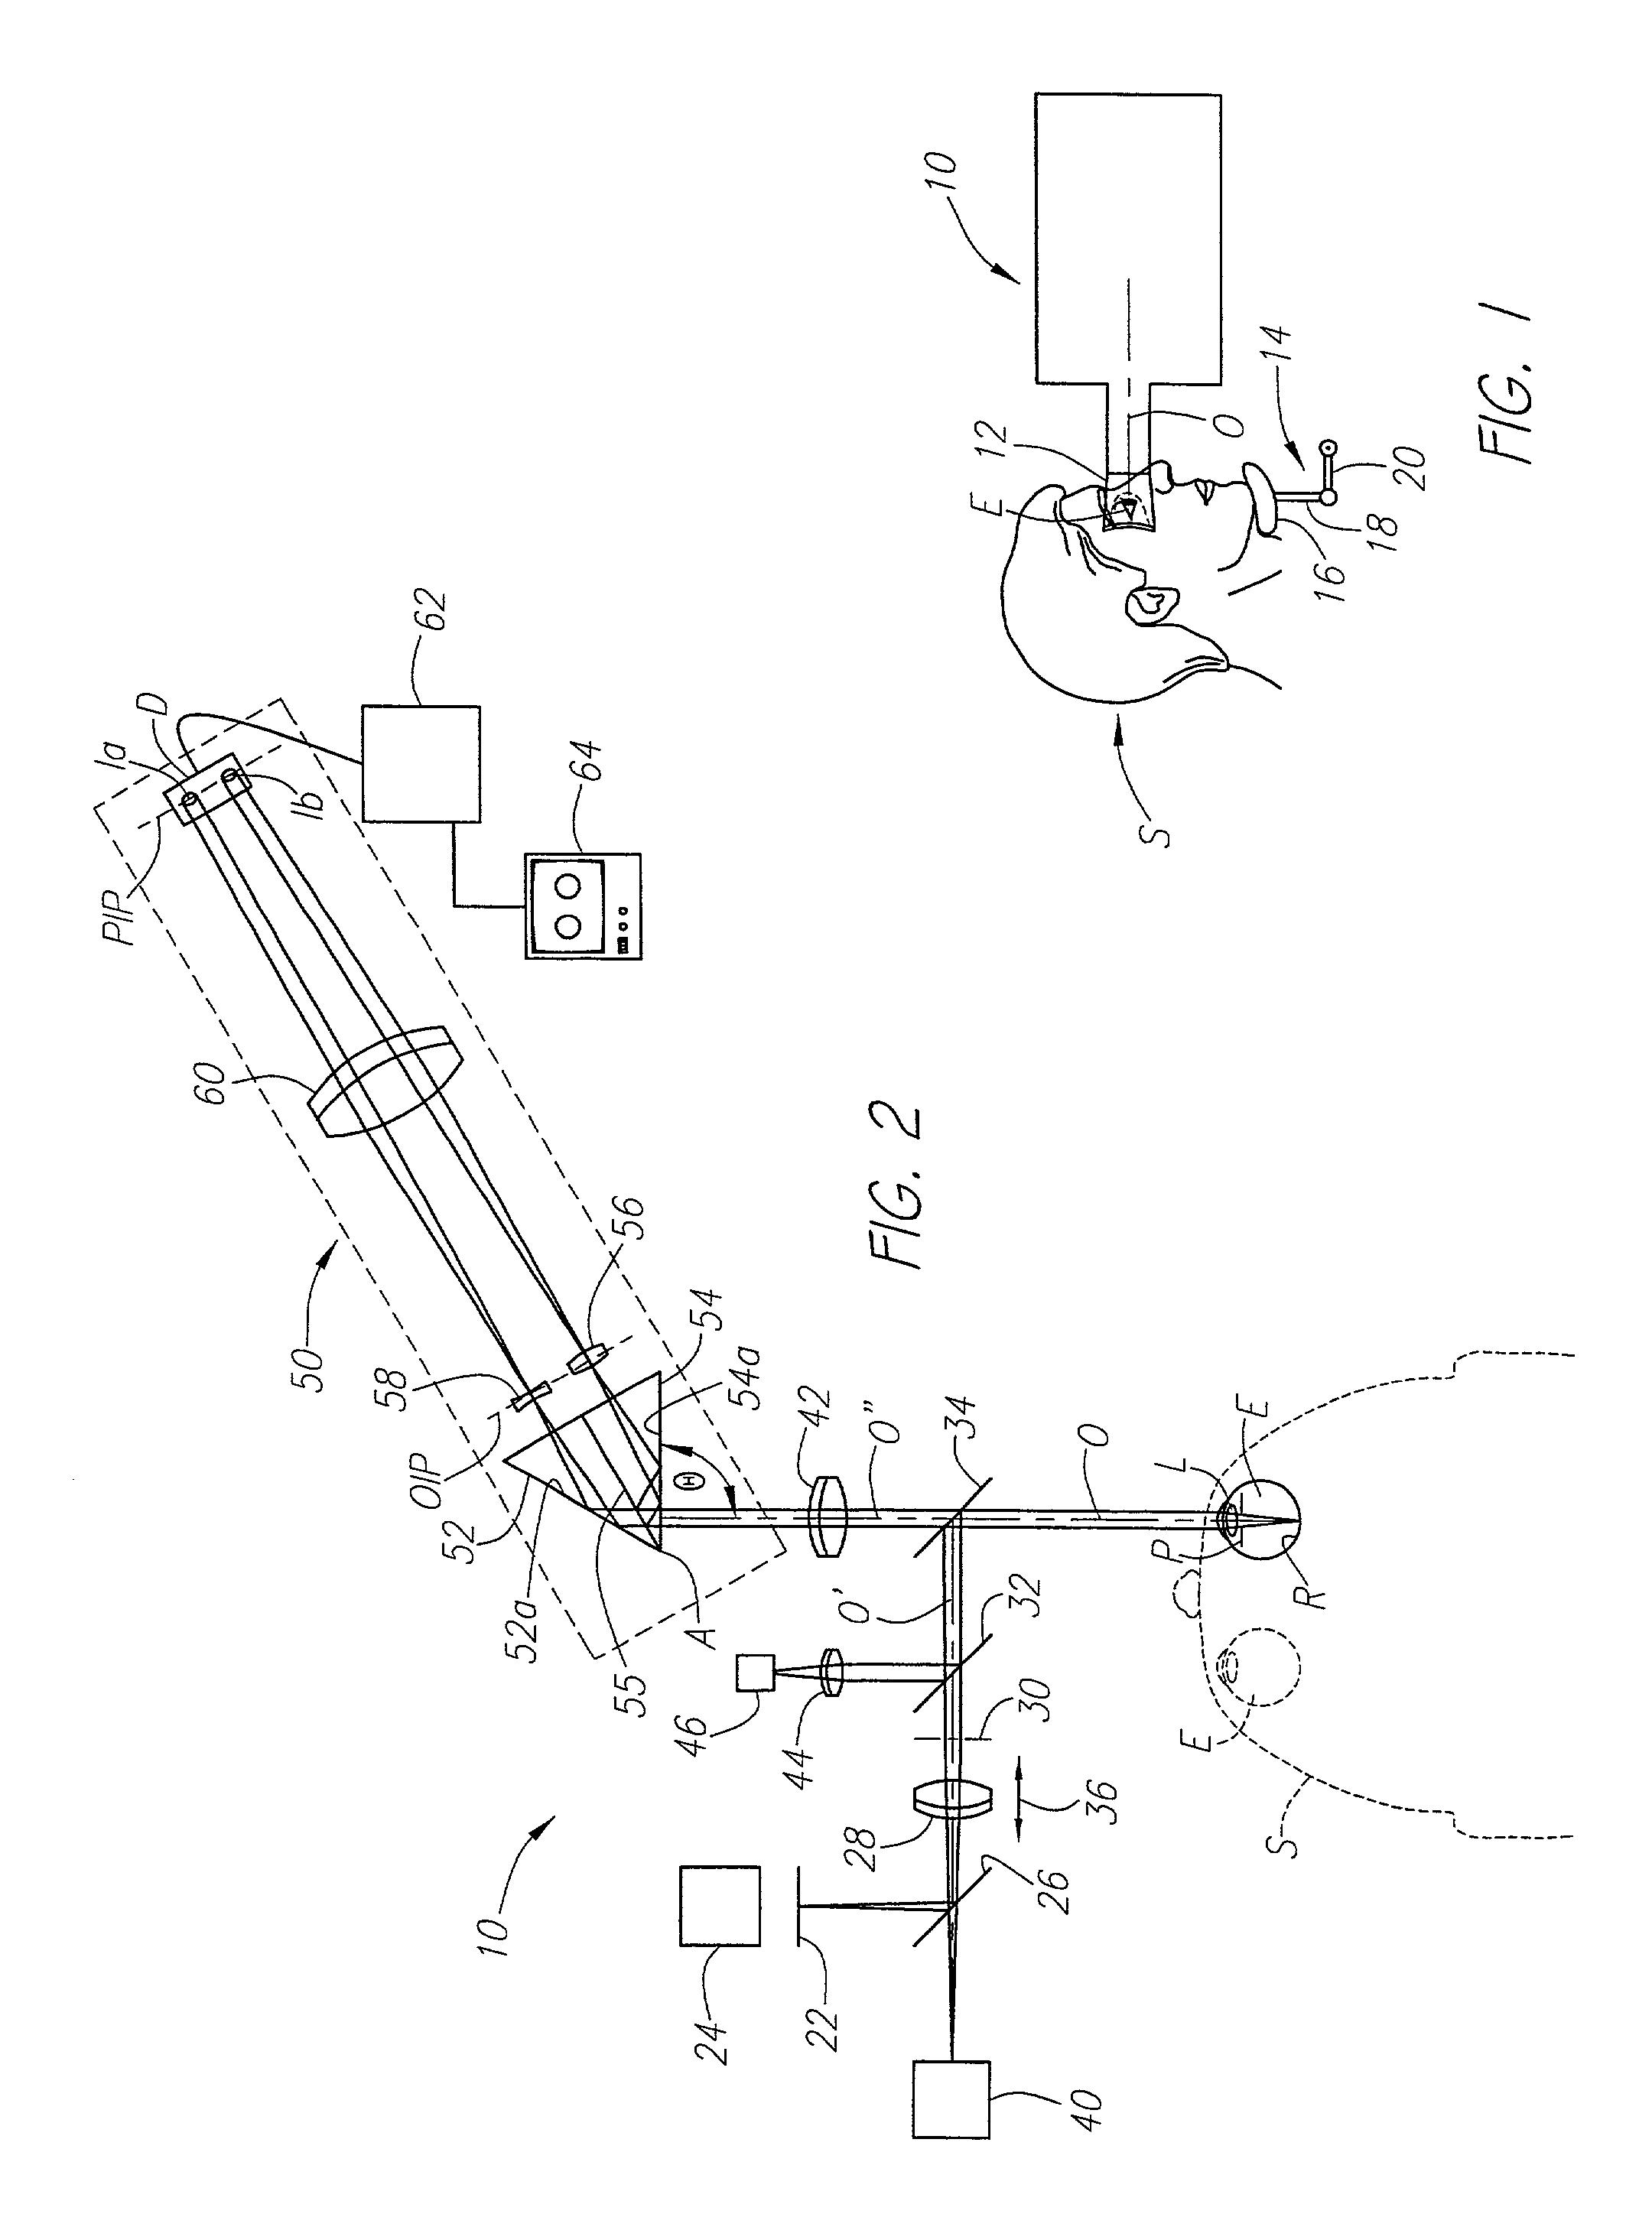 Method and apparatus for measuring optical aberrations of the human eye